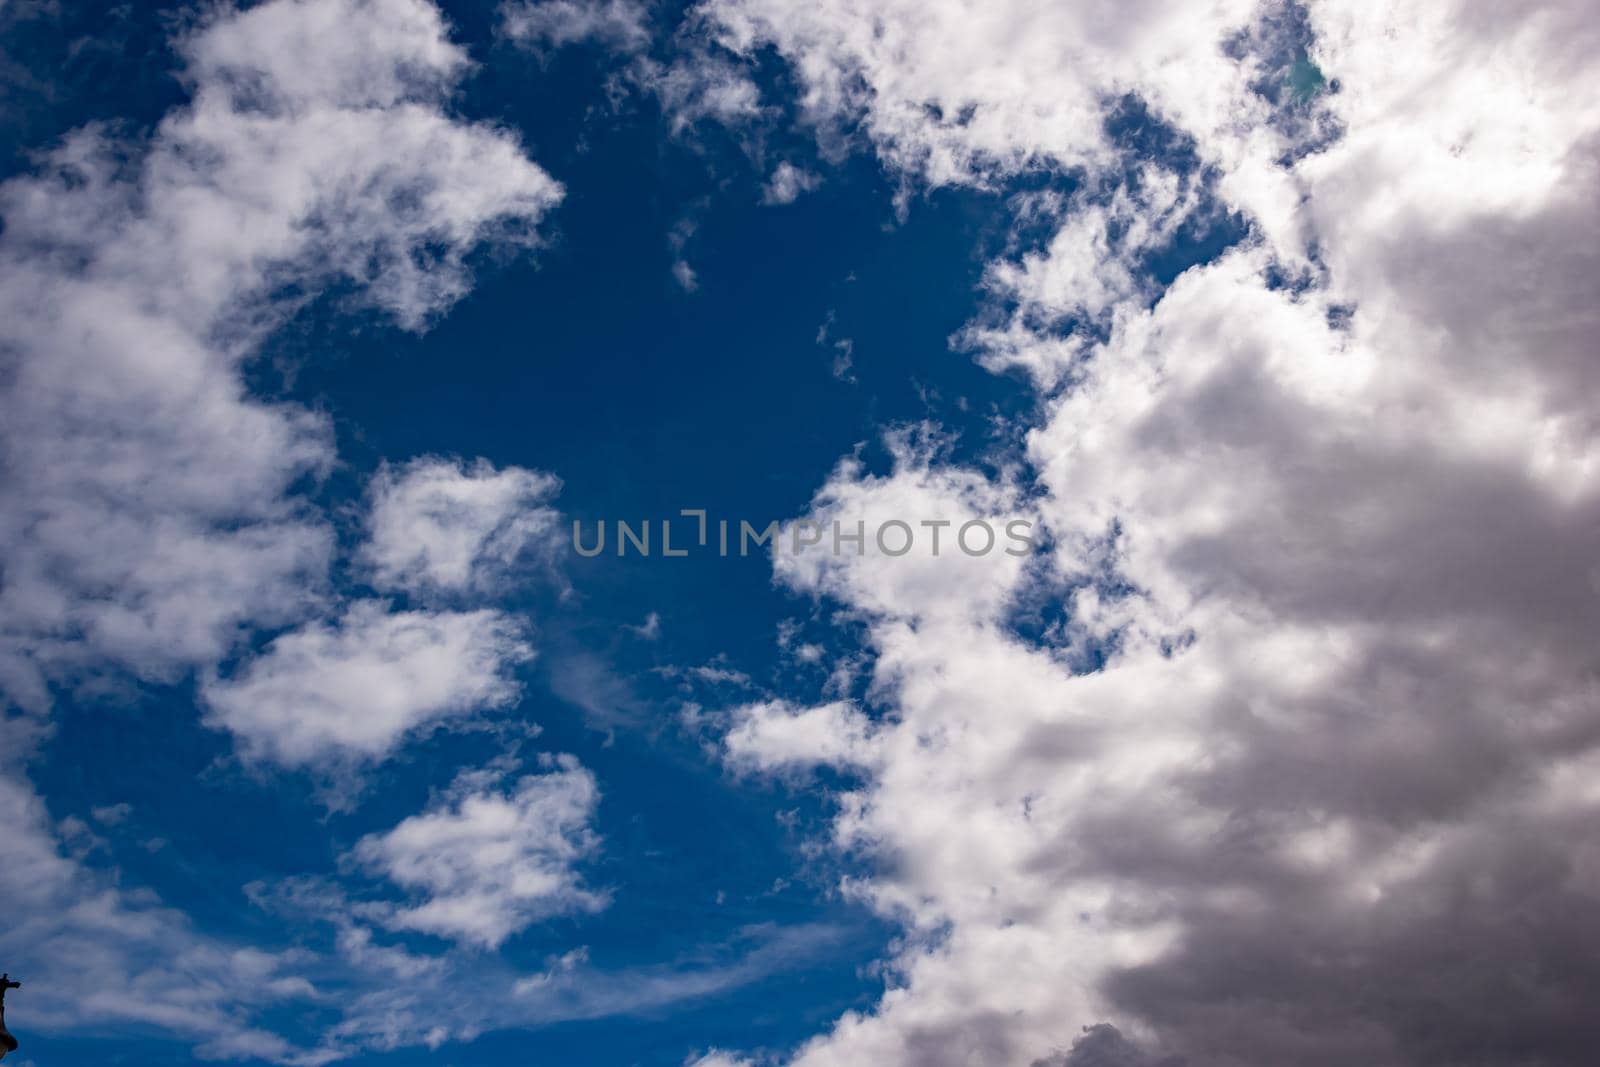 Beautiful shot of the blue sky and white clouds